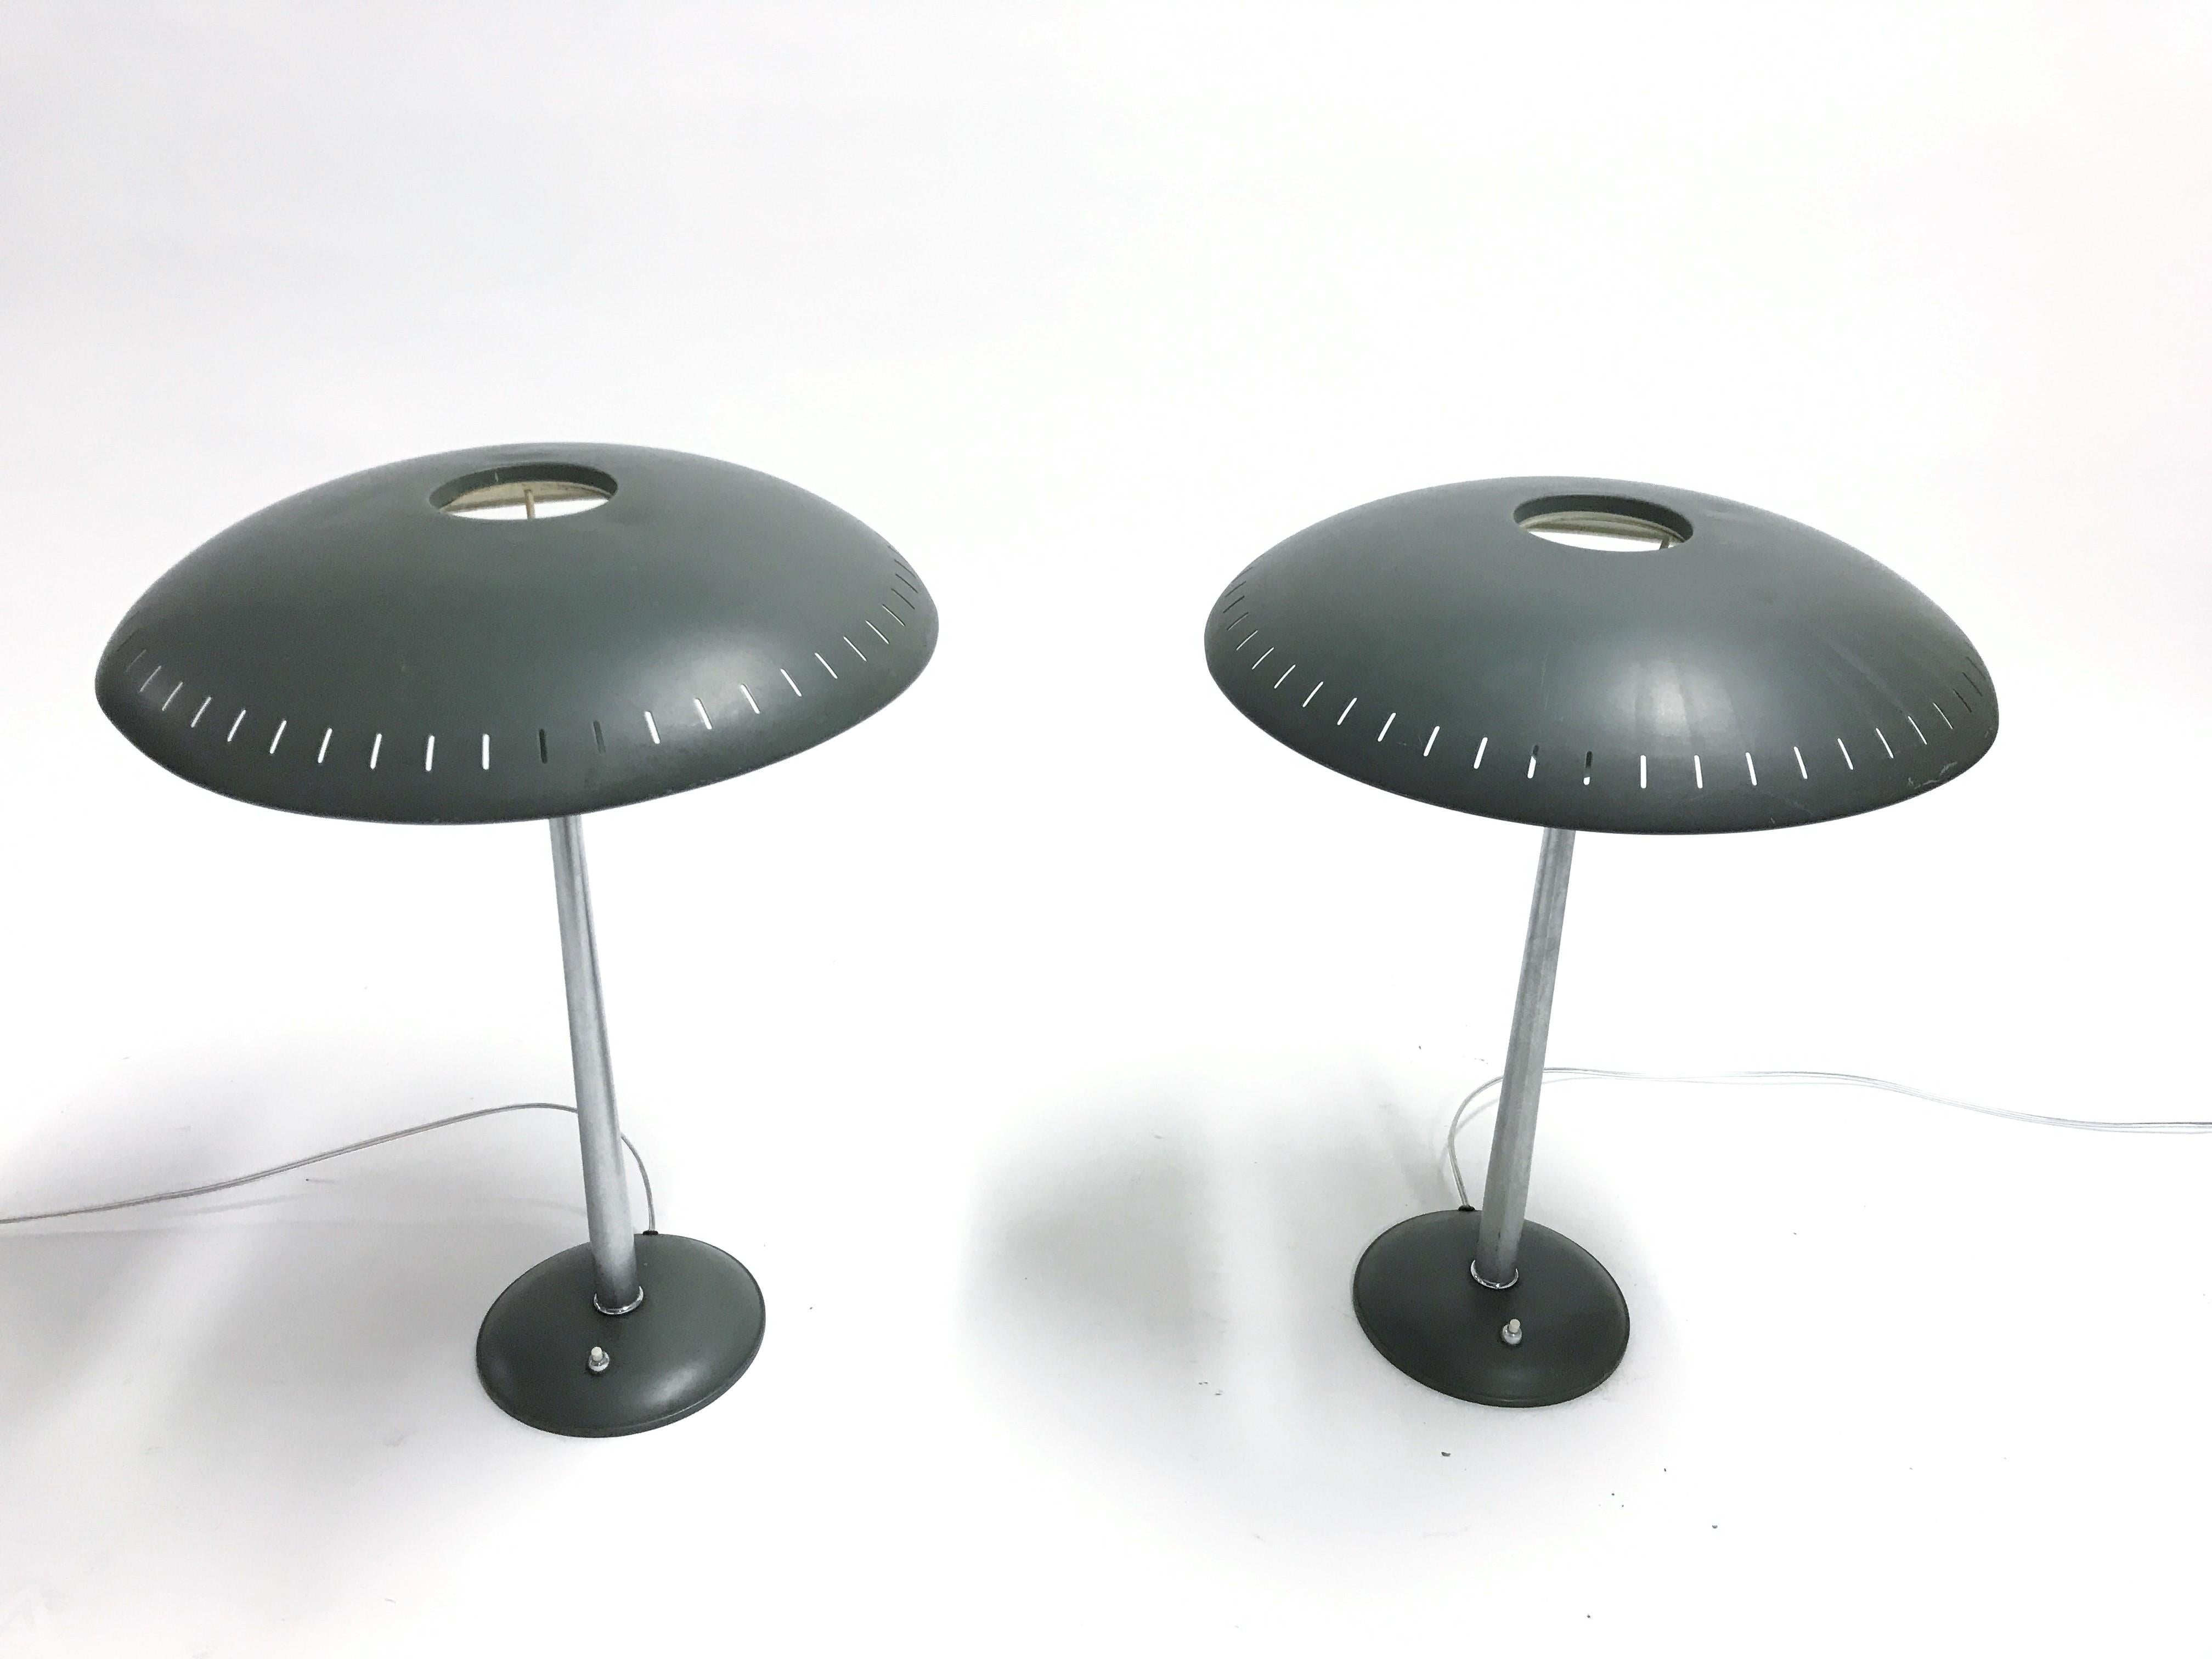 Midcentury table lamp designed by Louis Kalff for Philips.

The lamp consists of a round cast iron base with a chromed steel rod and a enameled perforated aluminum lamp shade.

The lamp shade has a 'ufo' design, typical for the Space Age era and